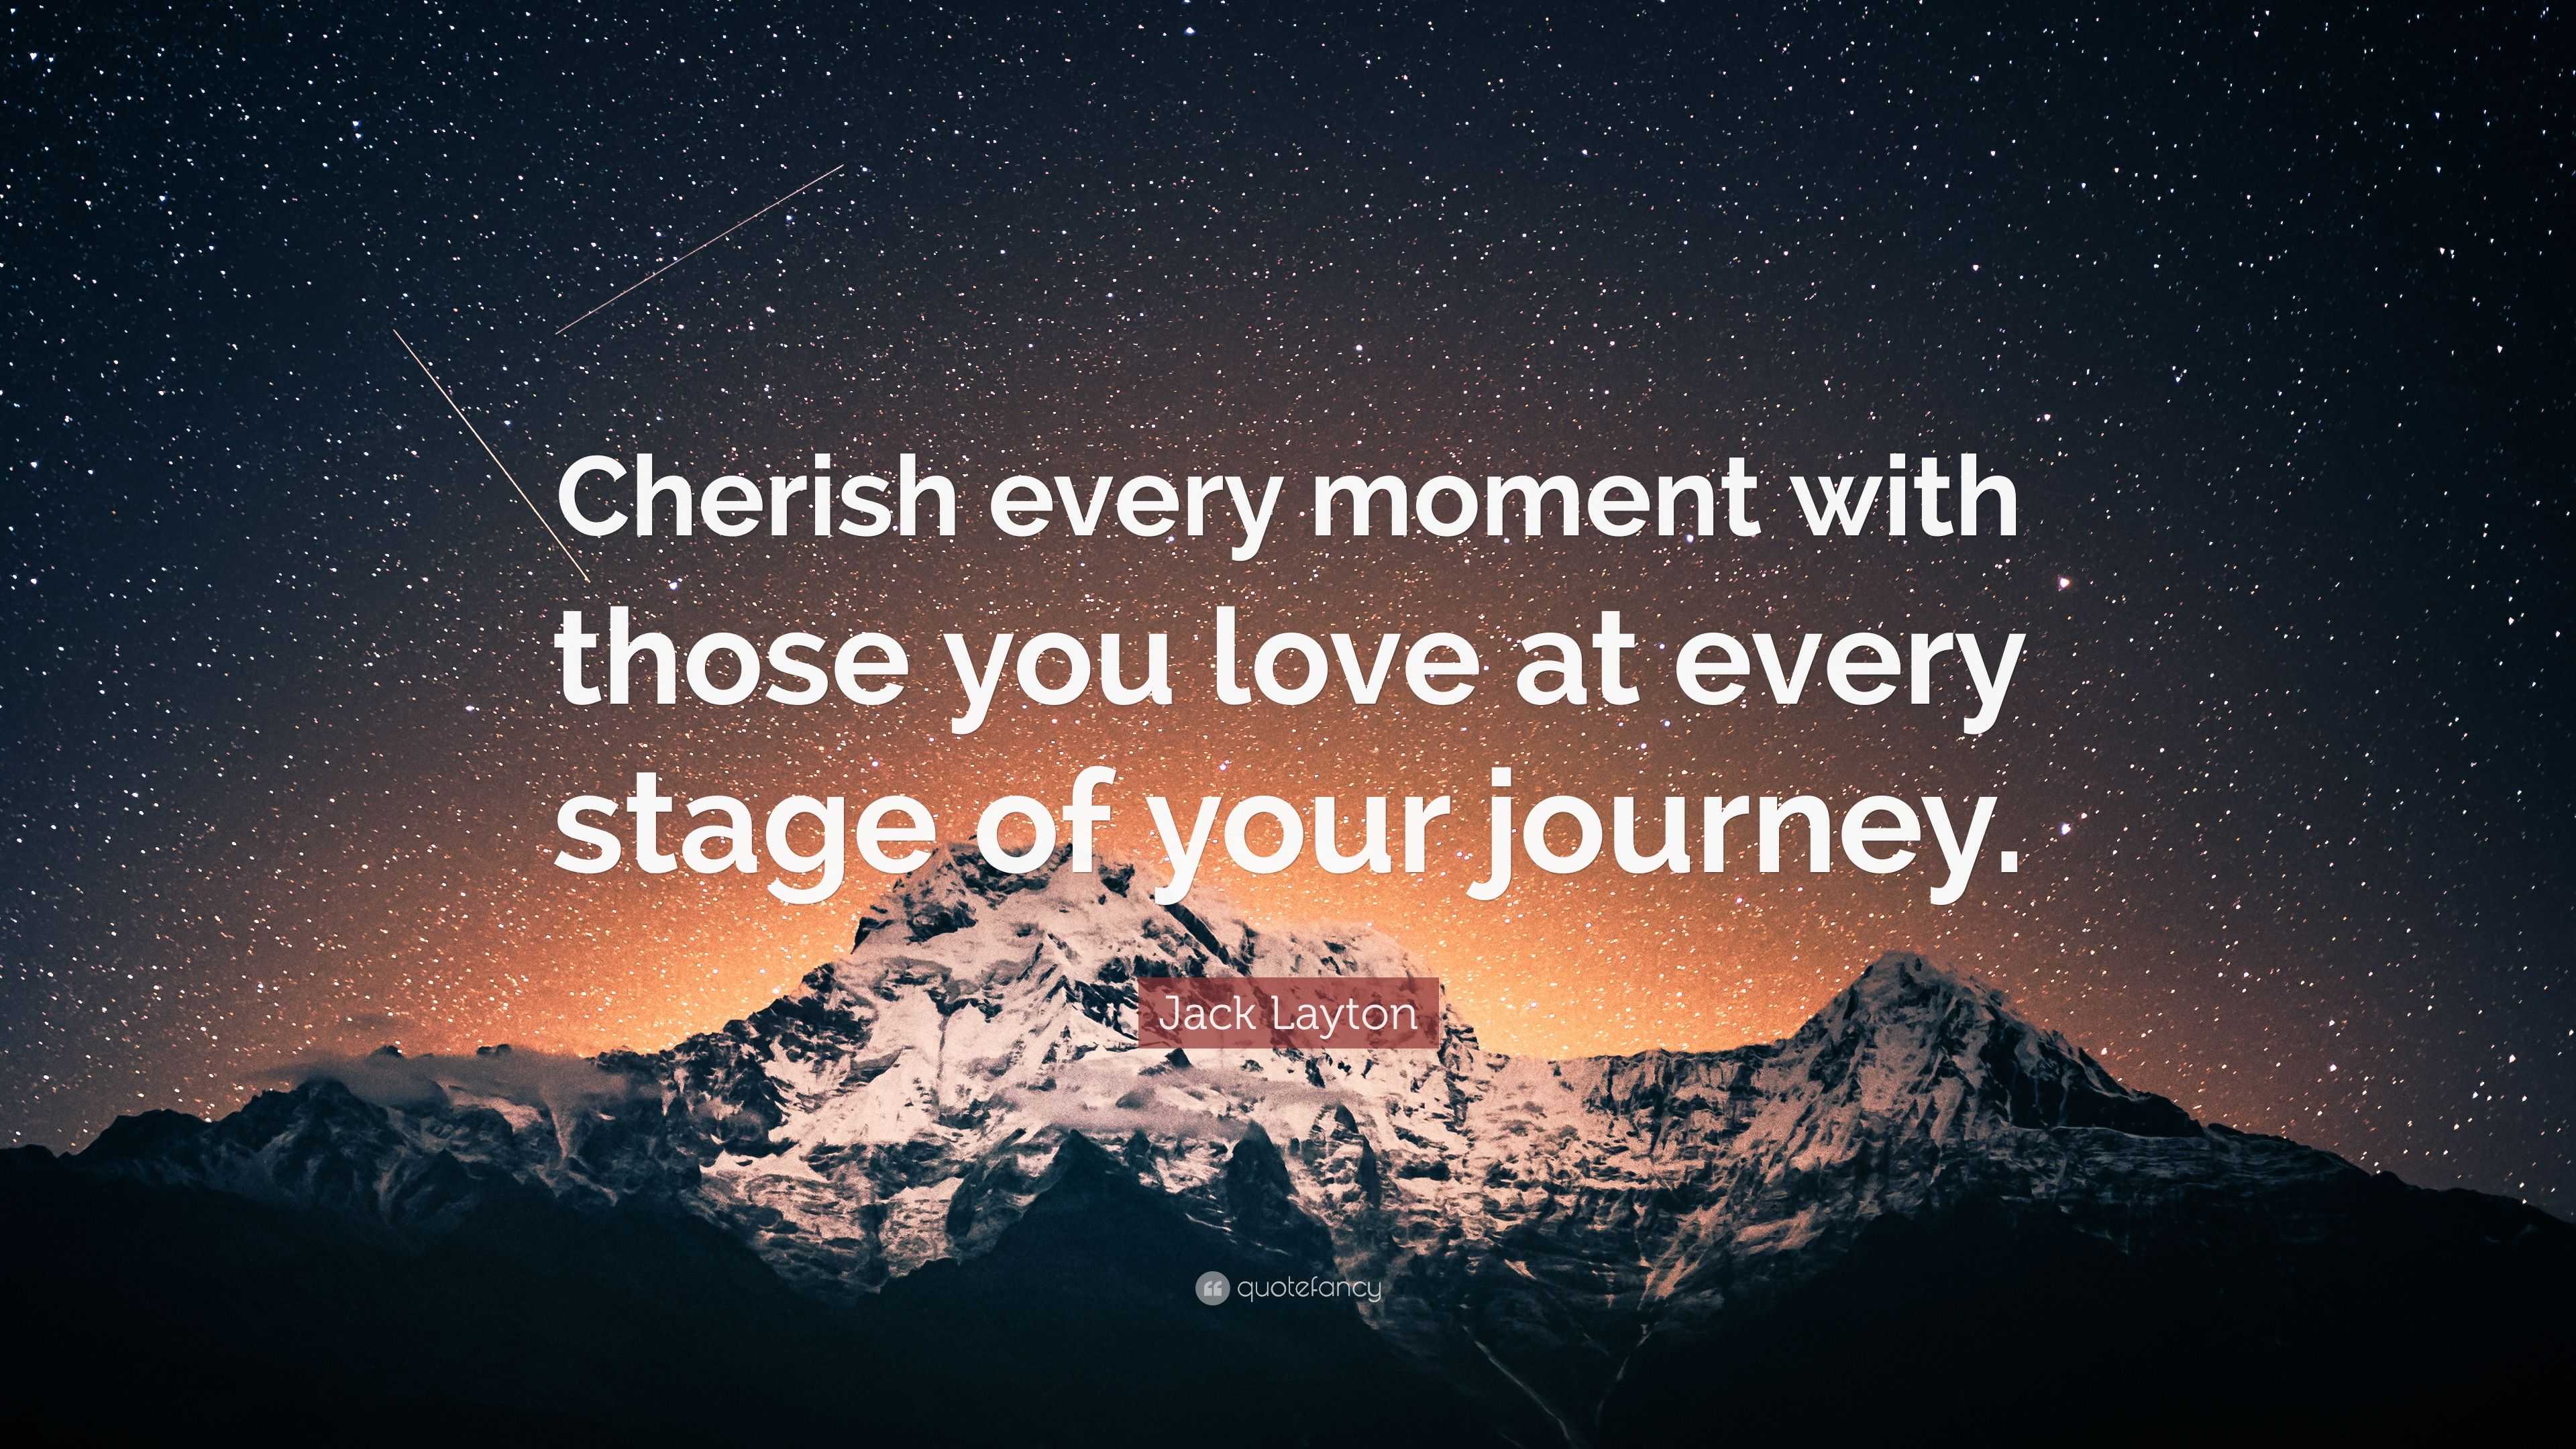 Jack Layton Quote: “Cherish every moment with those you love at every stage  of your journey.”